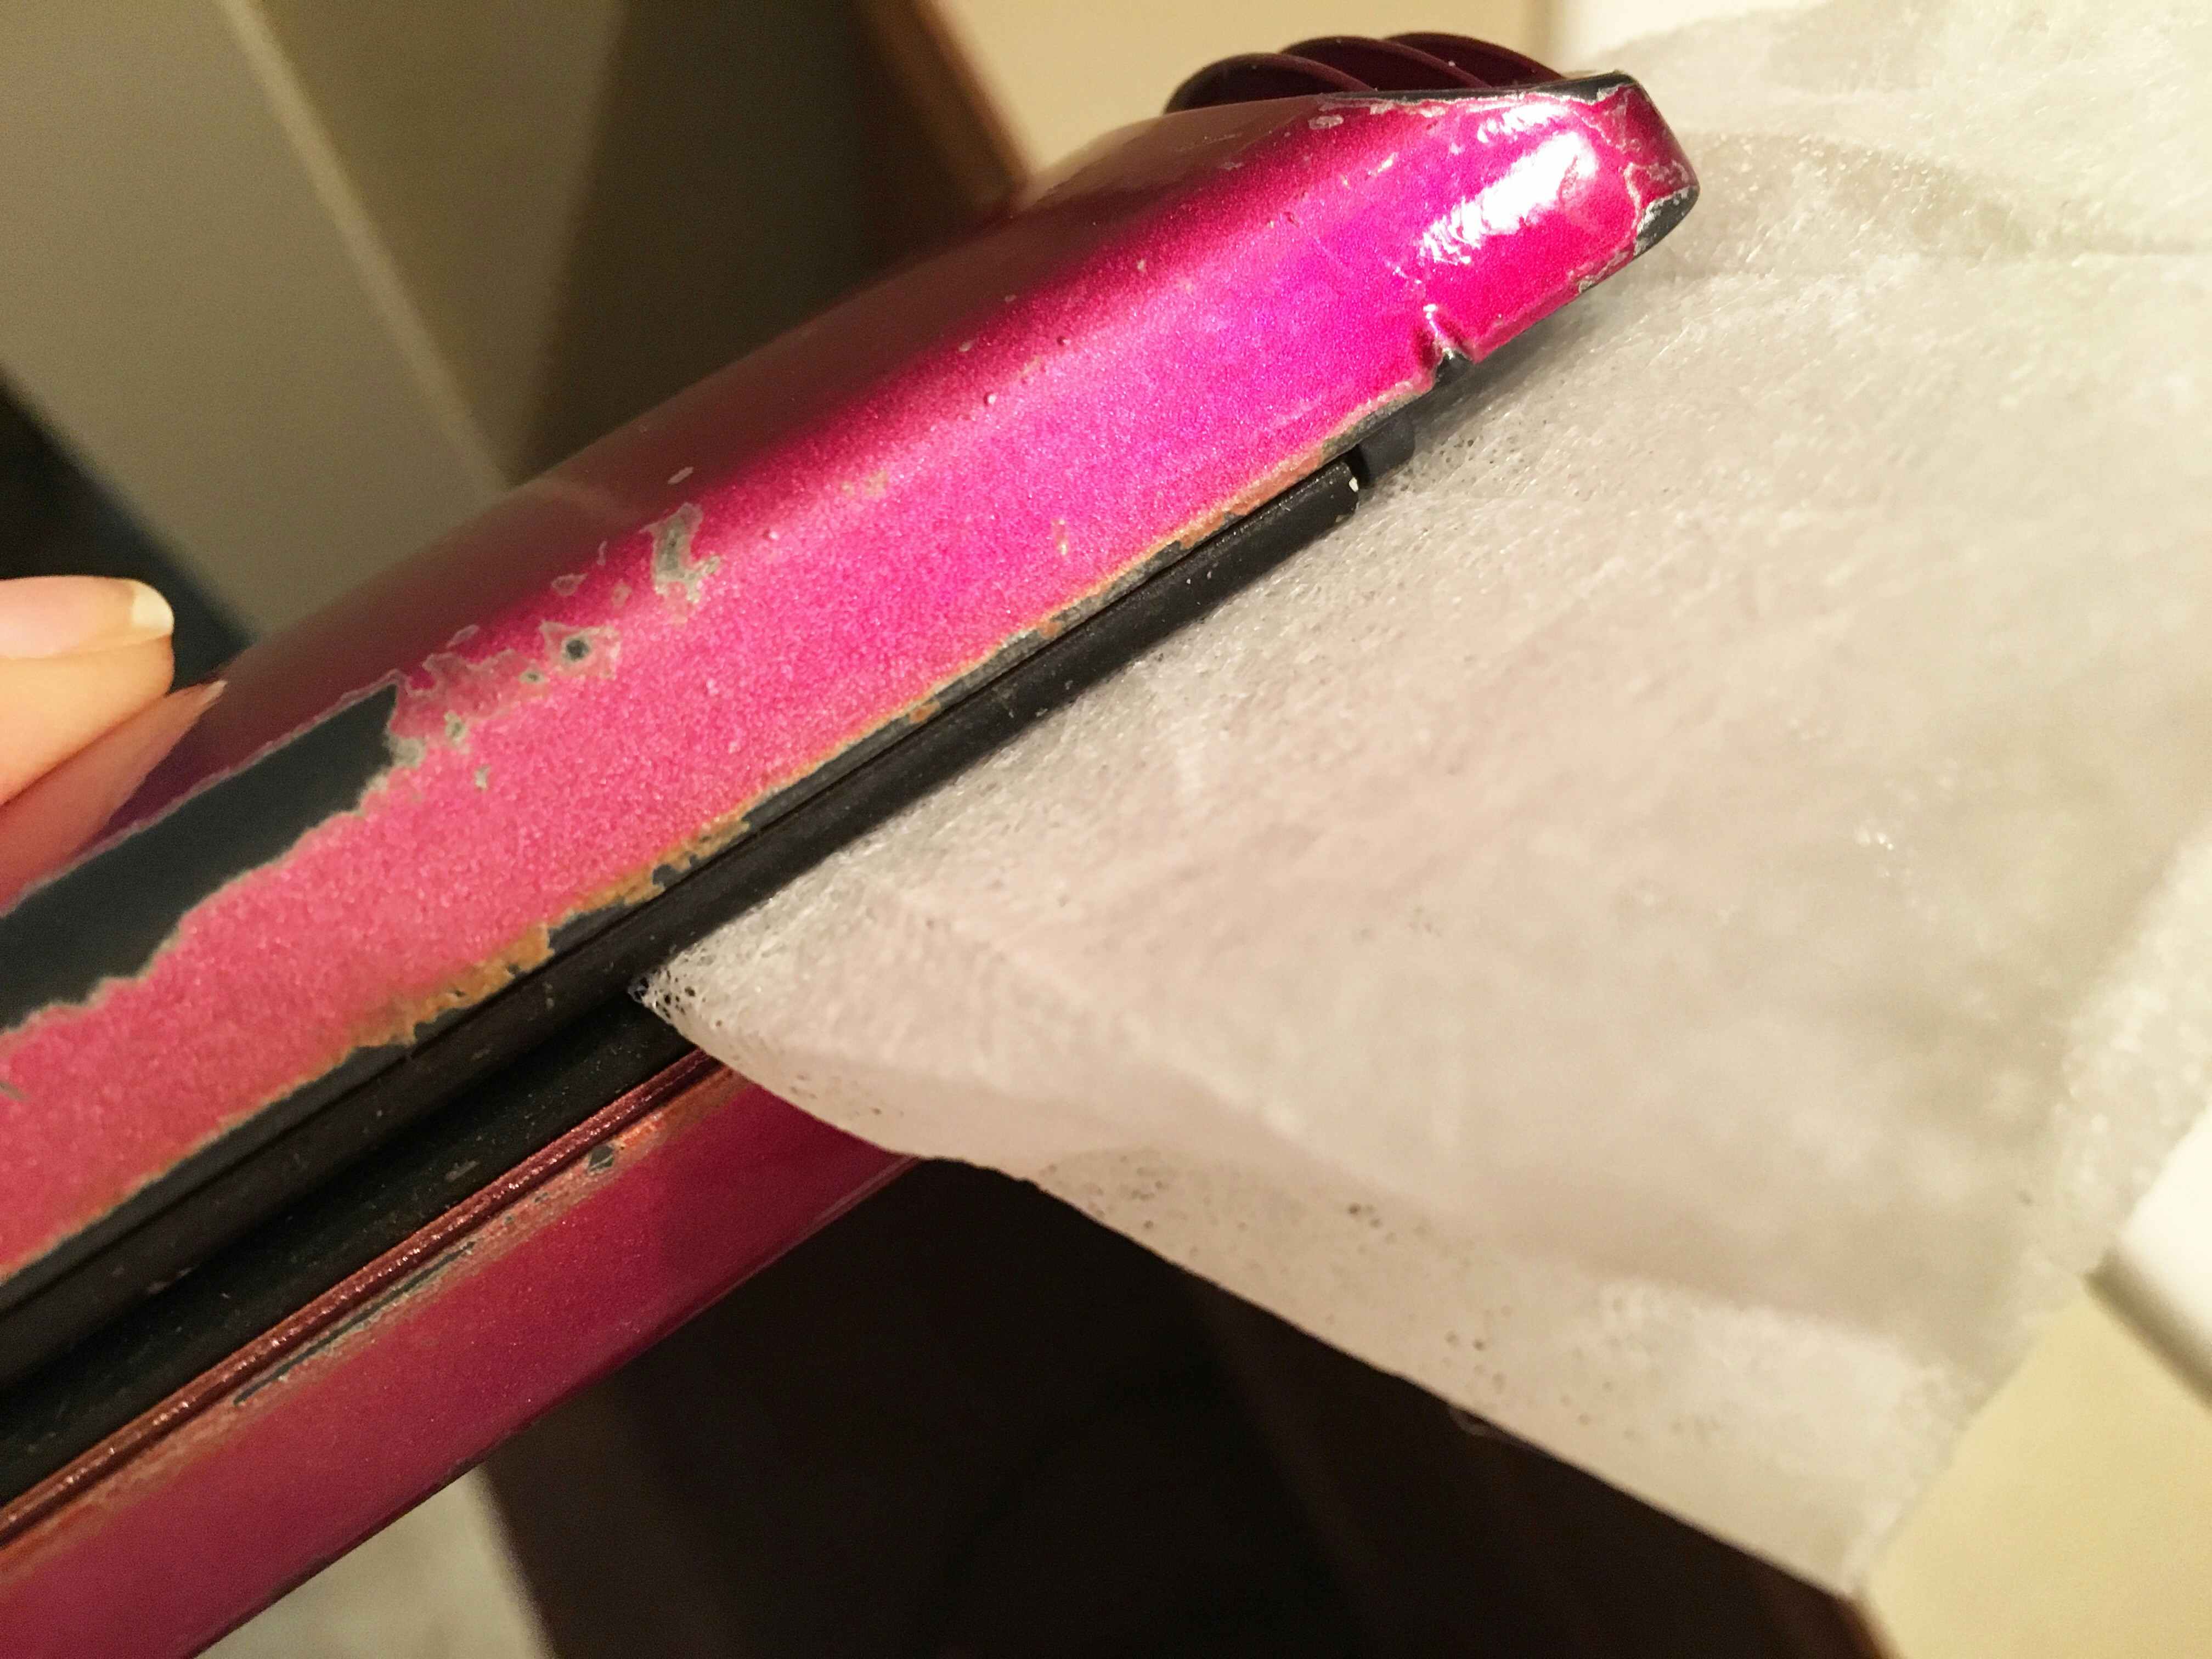 Clean gunk off your straightener or curling iron.